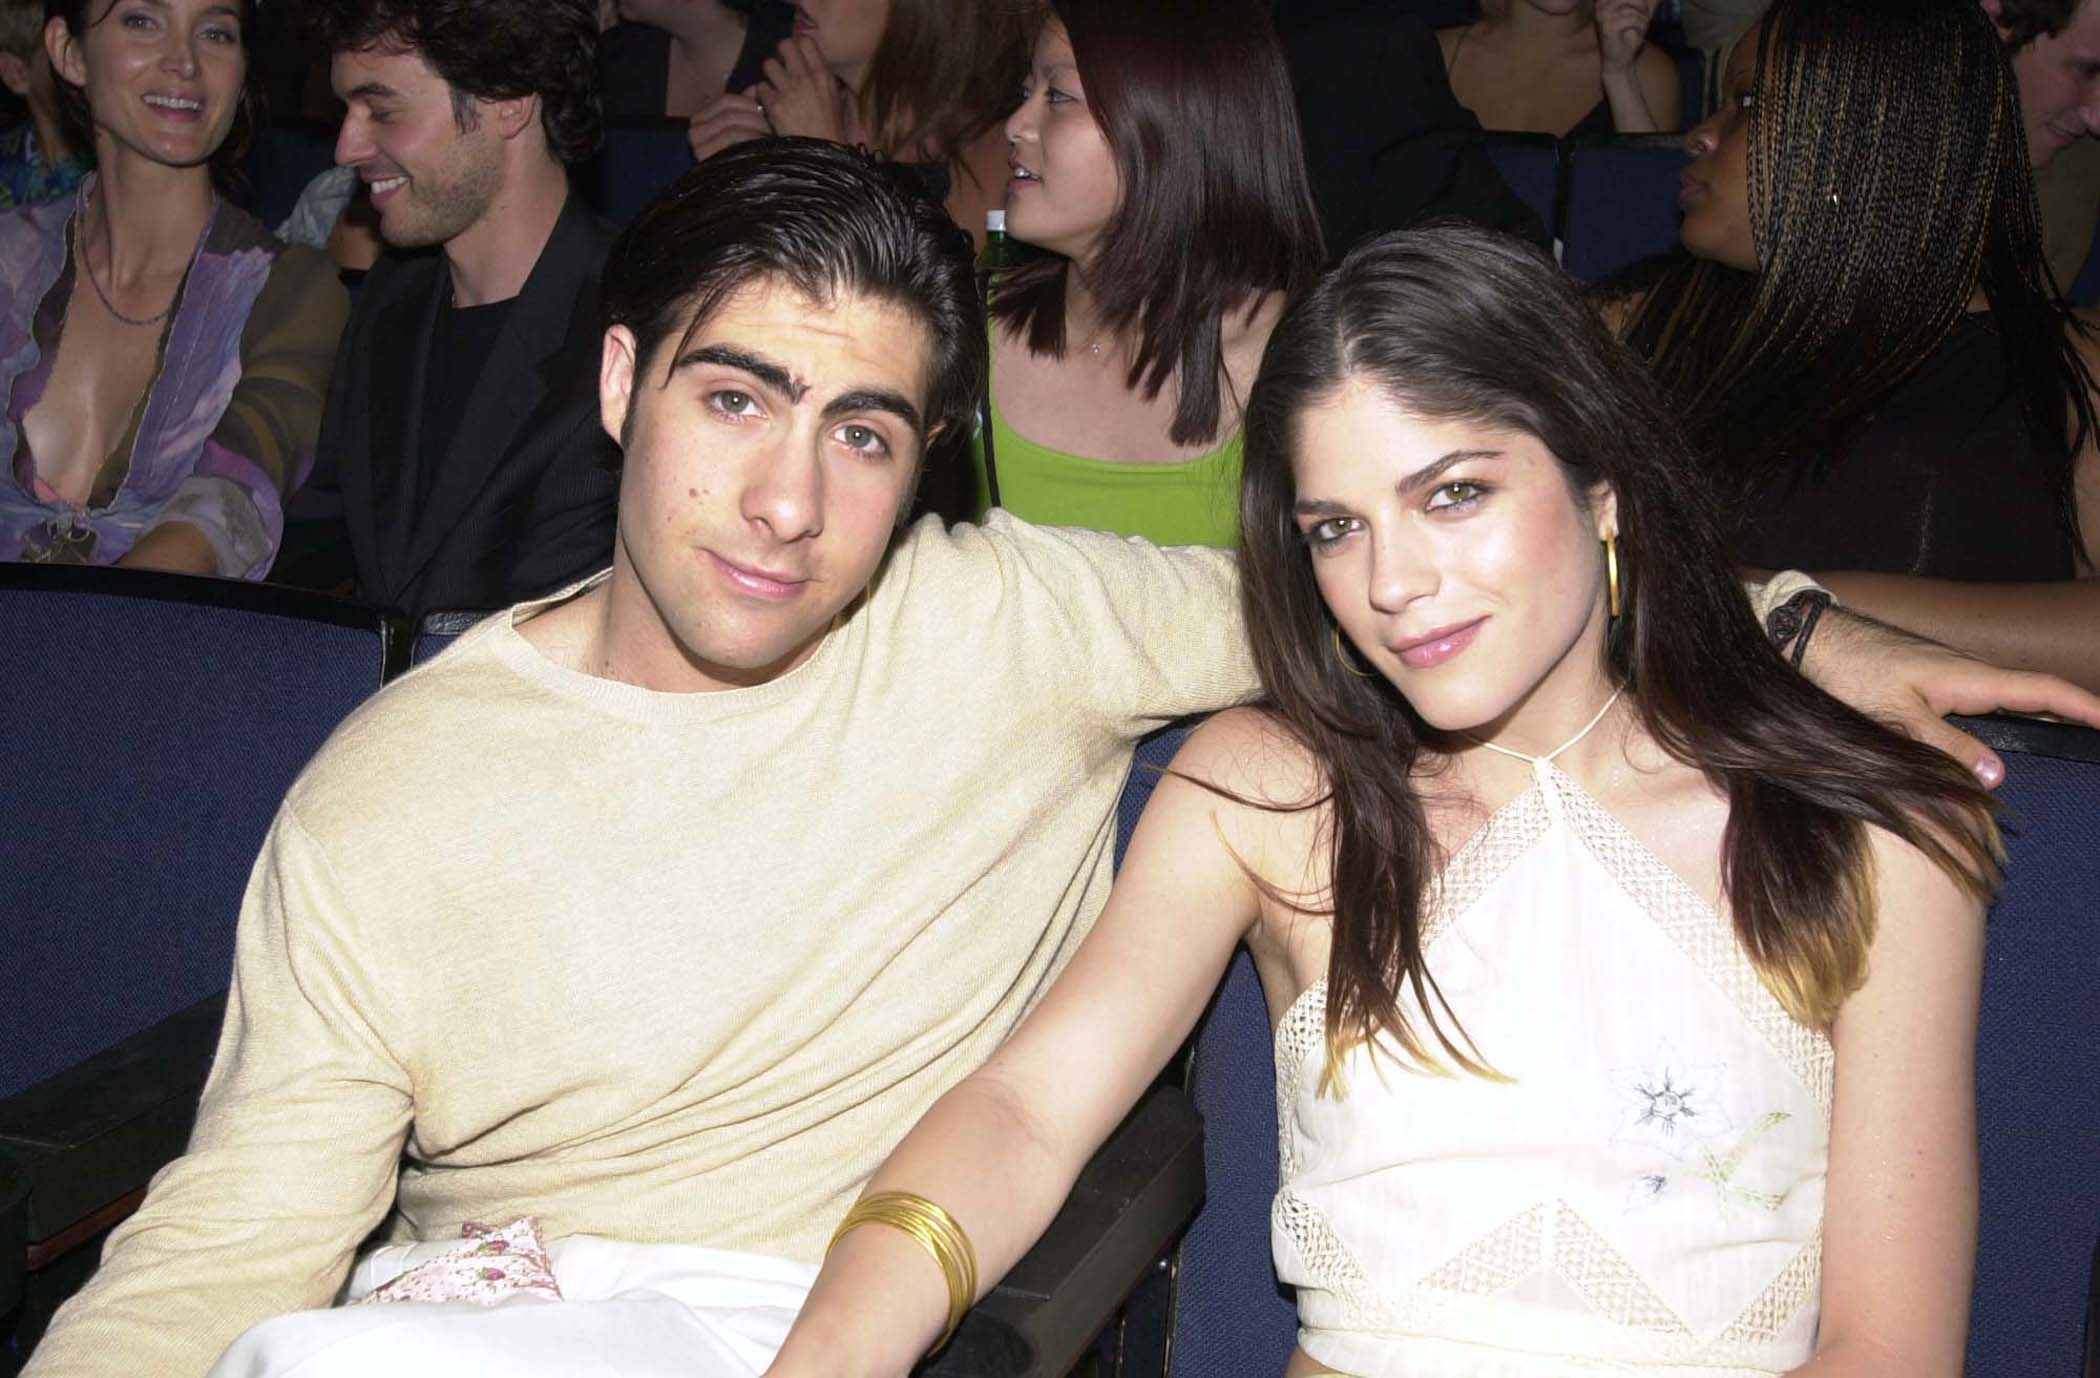 Jason Schwartzman and Selma Blair at the 2000 MTV Movie Awards on June 3, 2000 | Source: Getty Images